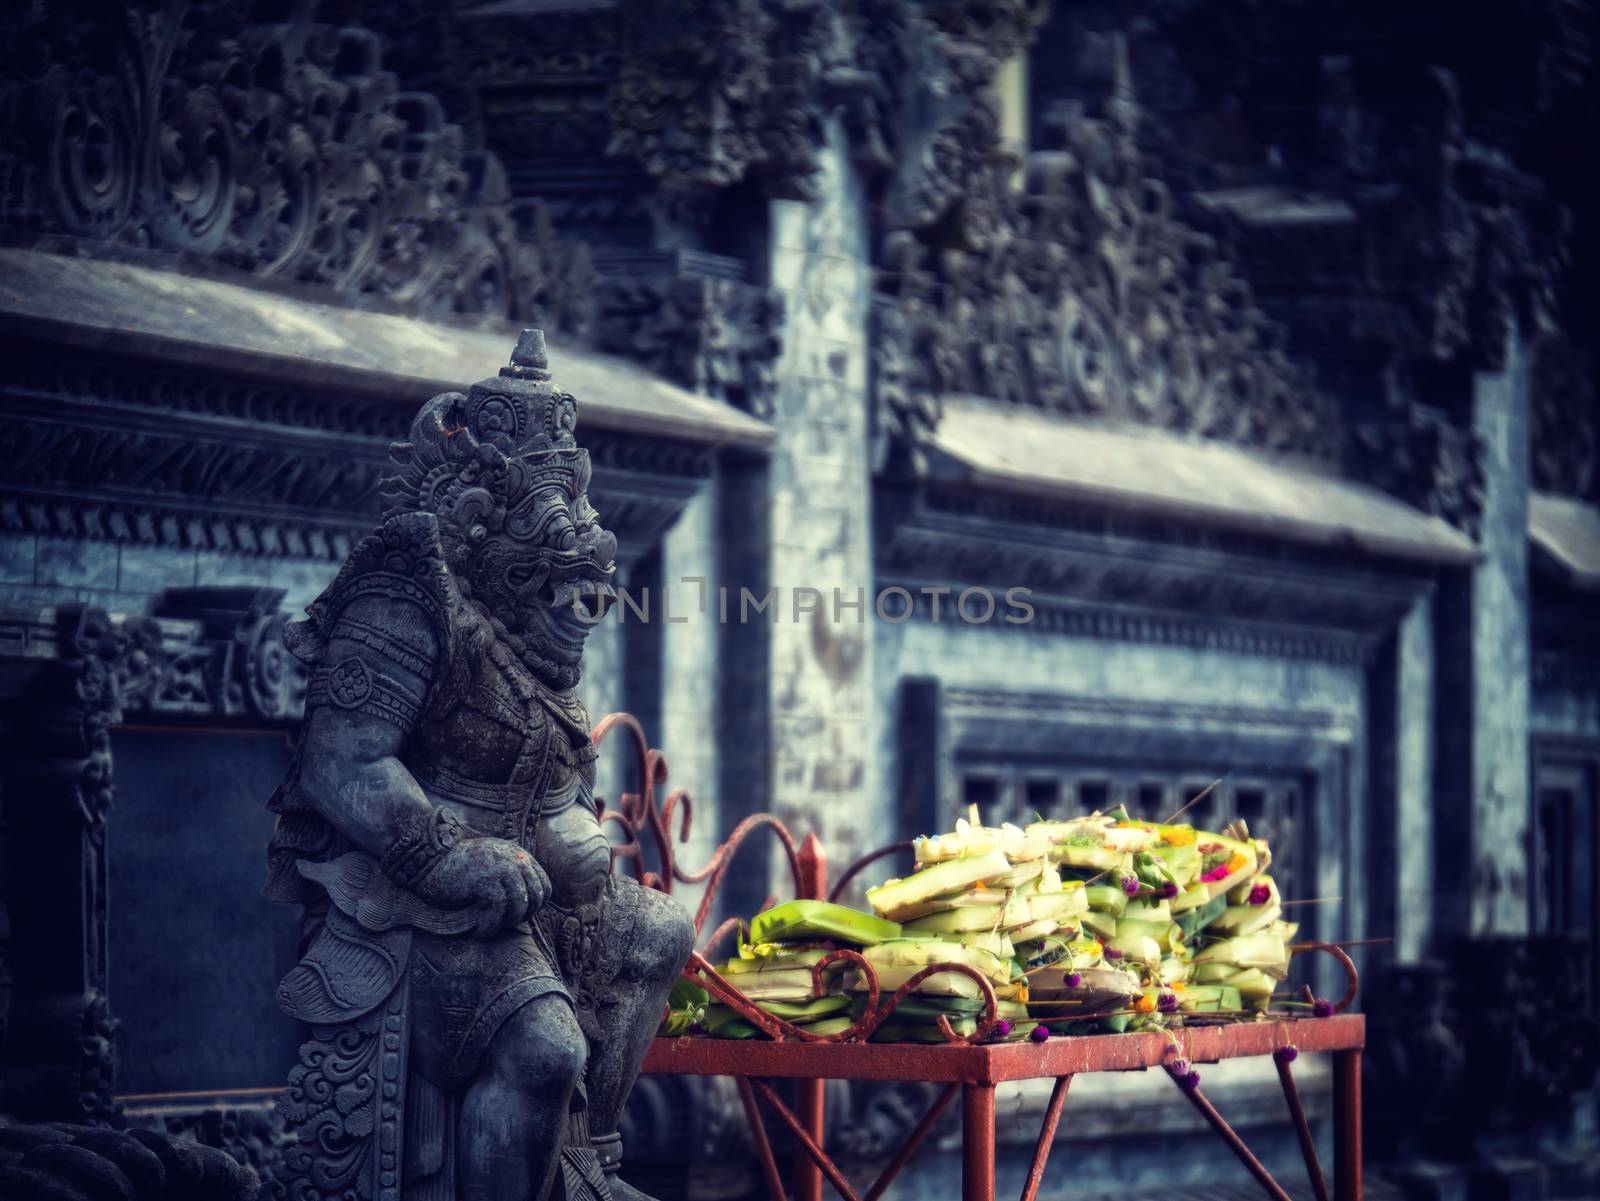 Gardian statue at the Bali temple entrance by Netfalls